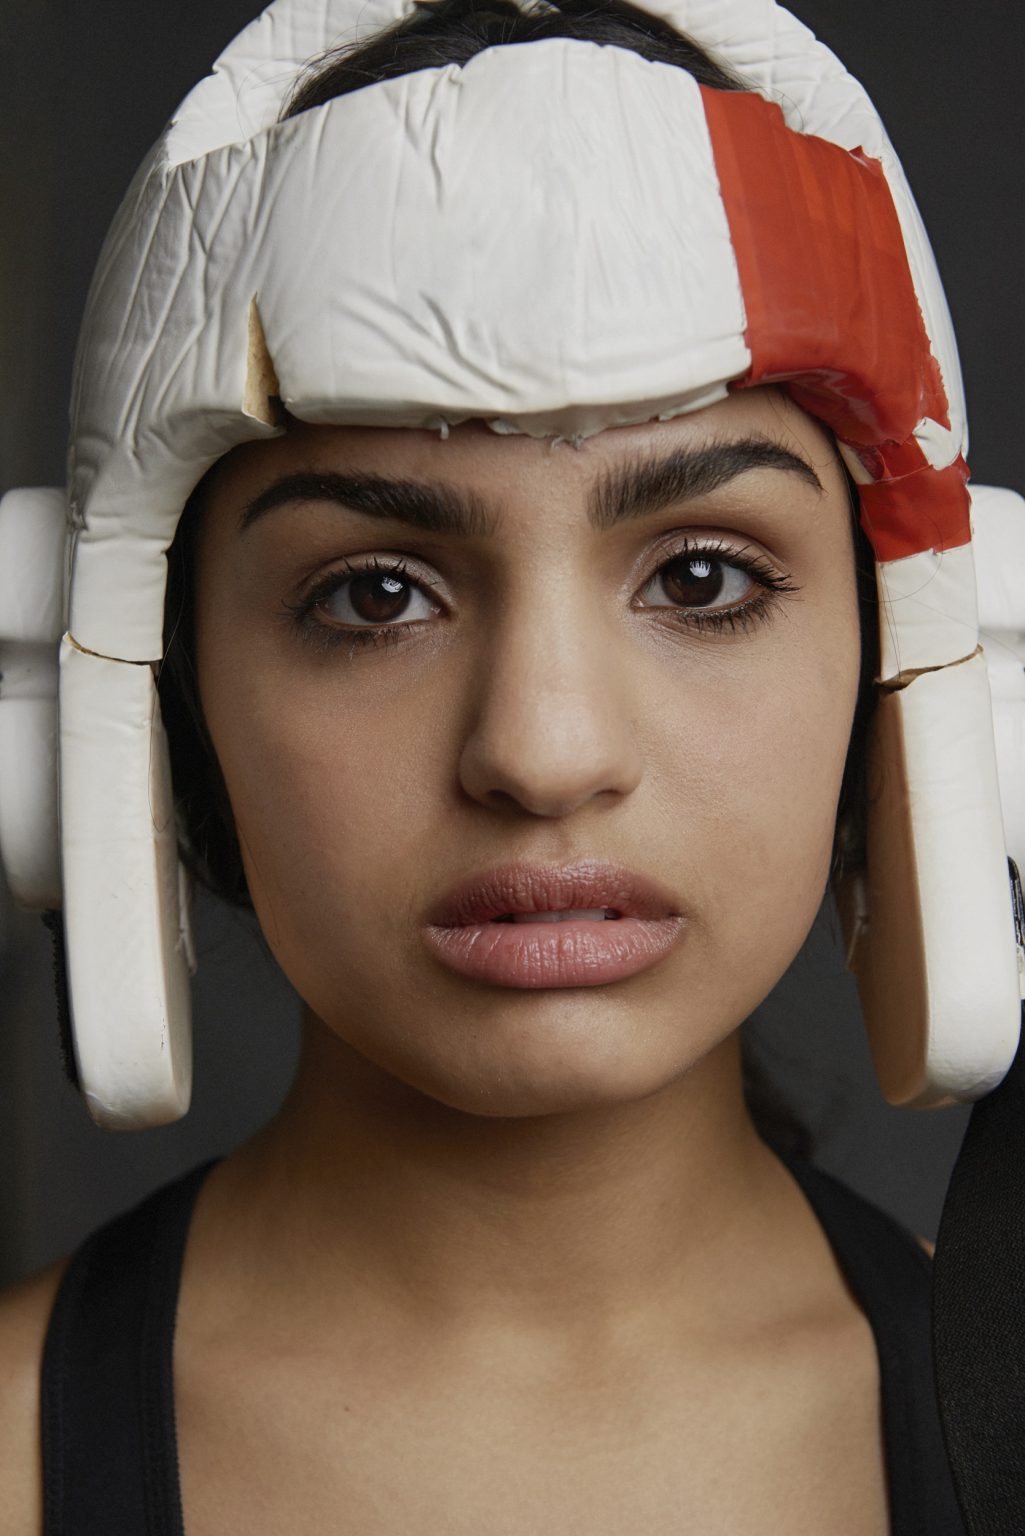 “My name is Youmna Nasri, I am 16 years old and I was born on July 2, 2004 in Rome. Still, since my parents are Tunisians, the Italian state does not consider me as Italian citizen. Italy is my country and I tried to honor it with taekwondo, the discipline I love and practiced since the age of five. I have been twice Italian champion in the junior category up to 44 kilograms, achieving the II dan black belt. But, despite the perseverance and love, I can't represent my country in European or world competitions, because I'm not italian! It is madness that I cannot carry up the flag of my country abroad. Because my country, the one that raised me and made me champion, does not recognize me. I just would like to do what I love and compete for Italy without feeling discriminated”. 